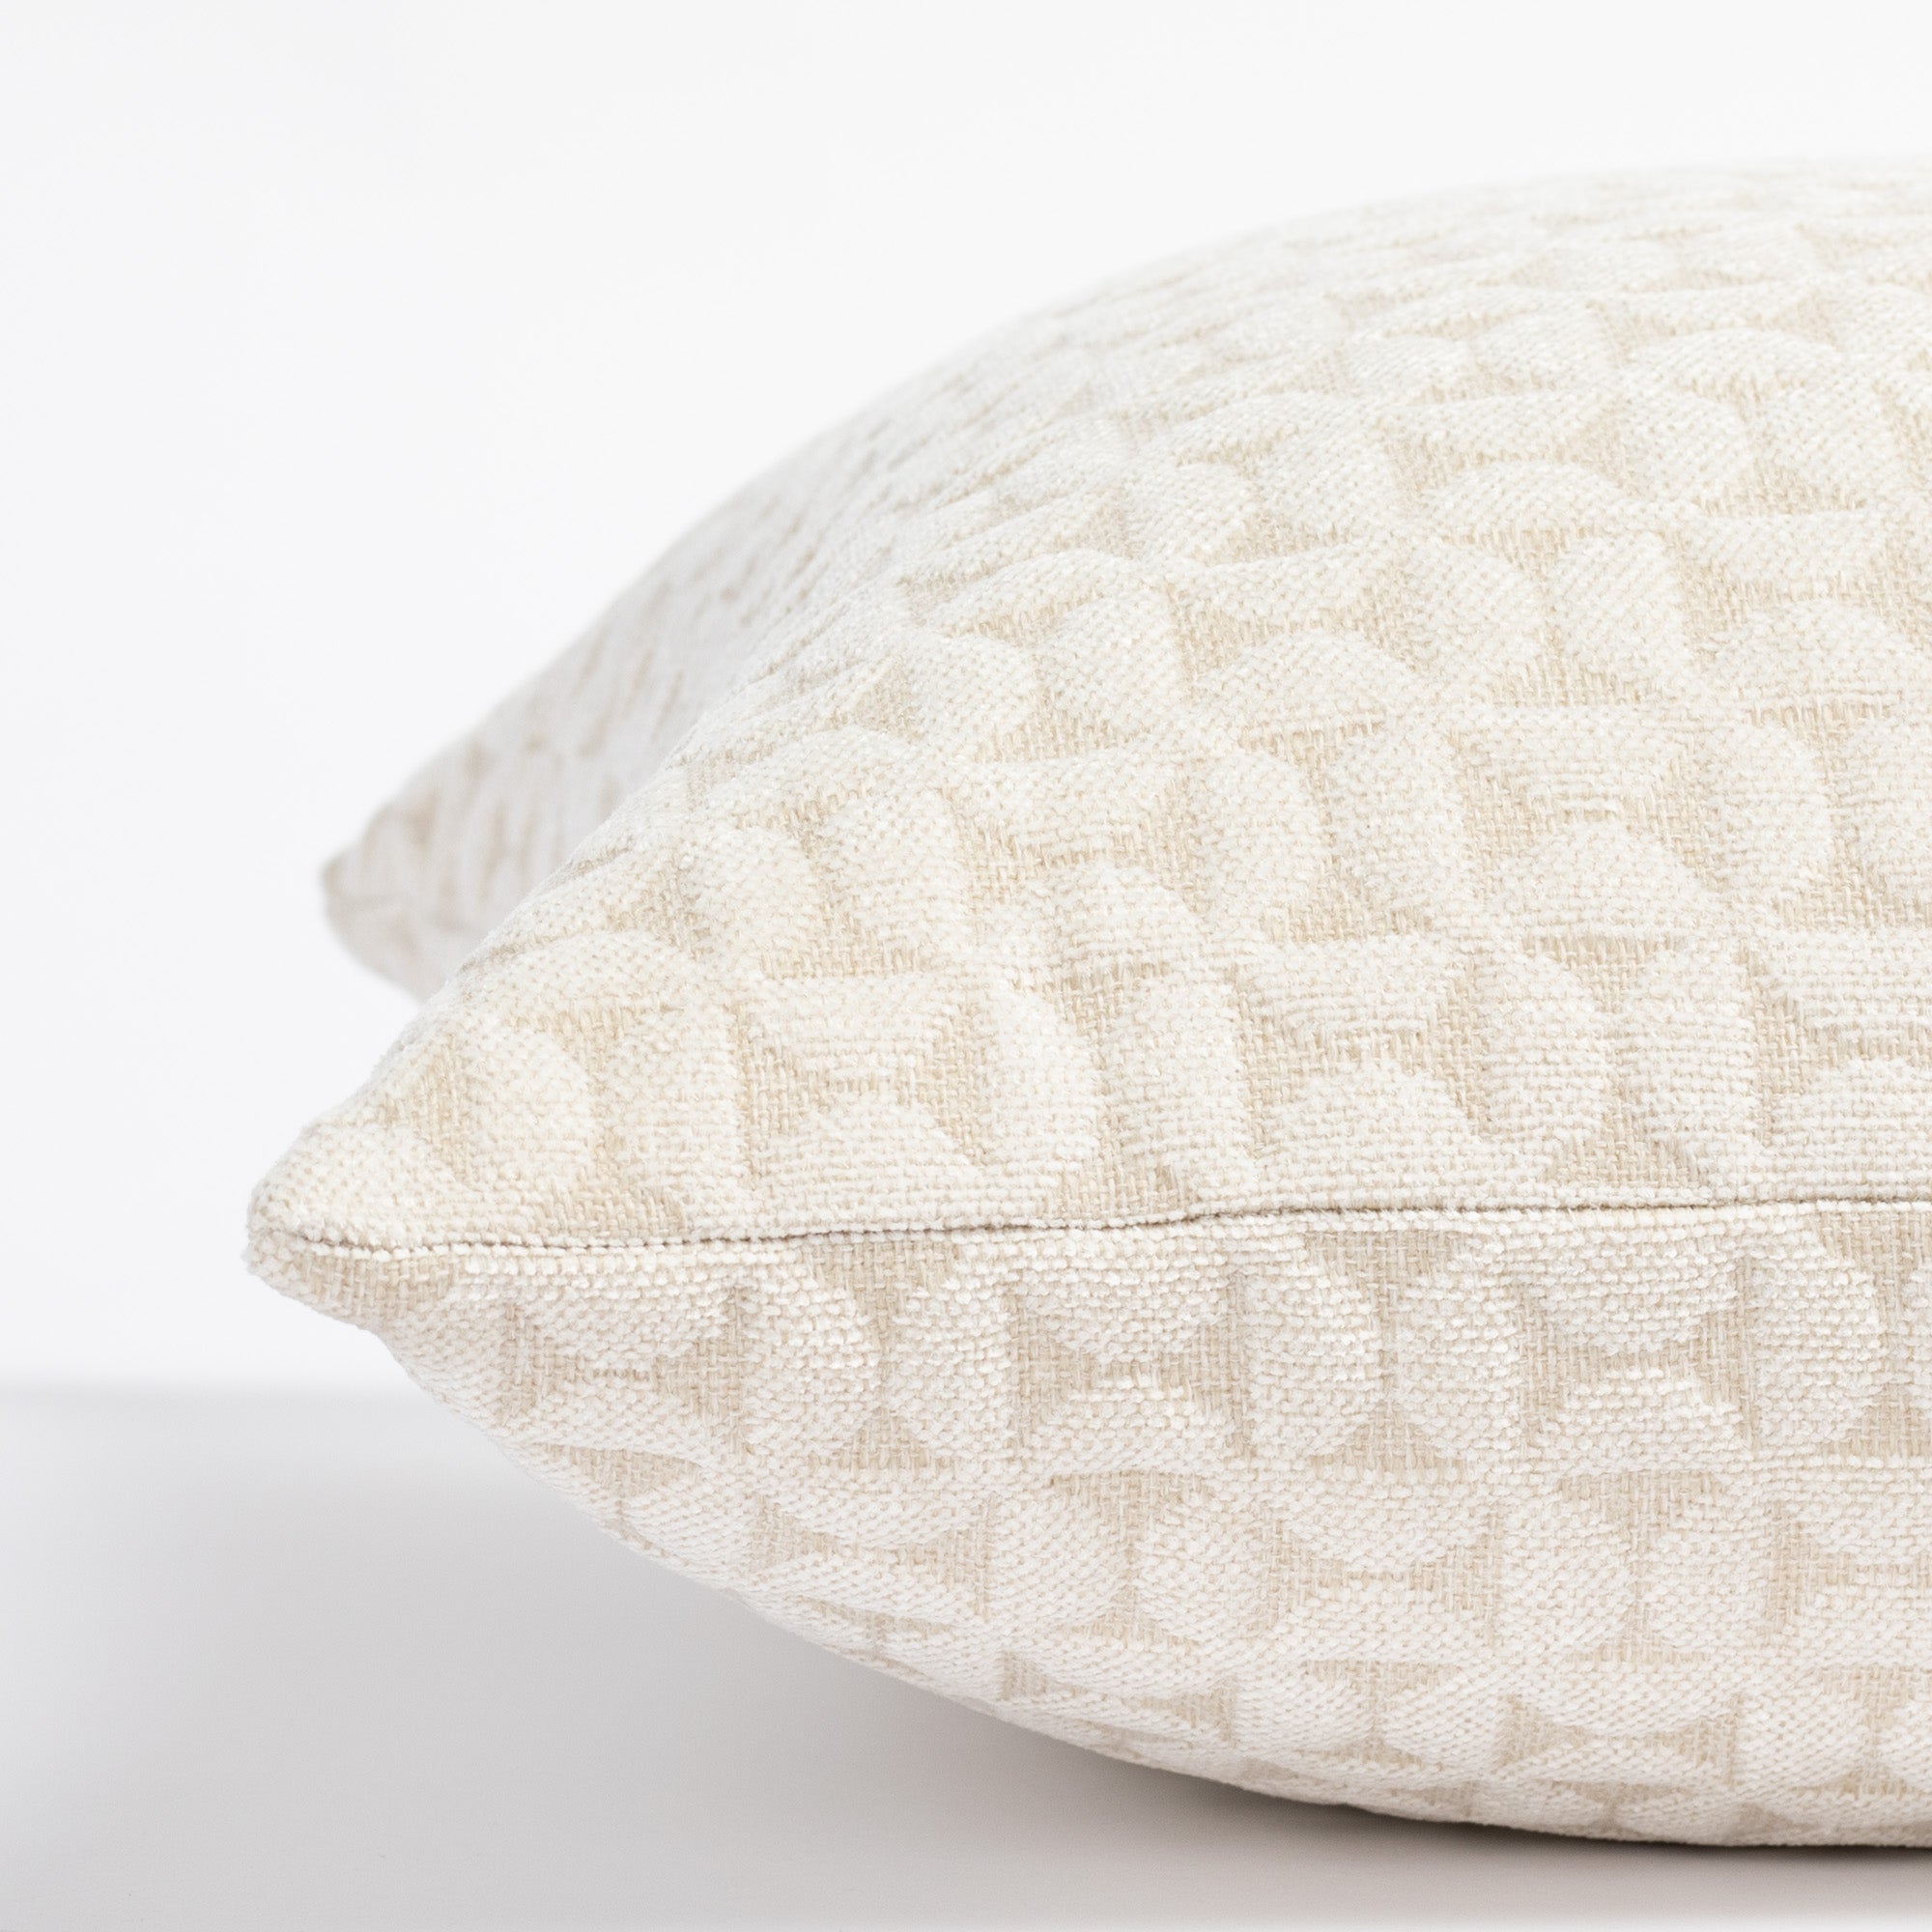 a plush white geometric quilted patterned pillow : close up side view